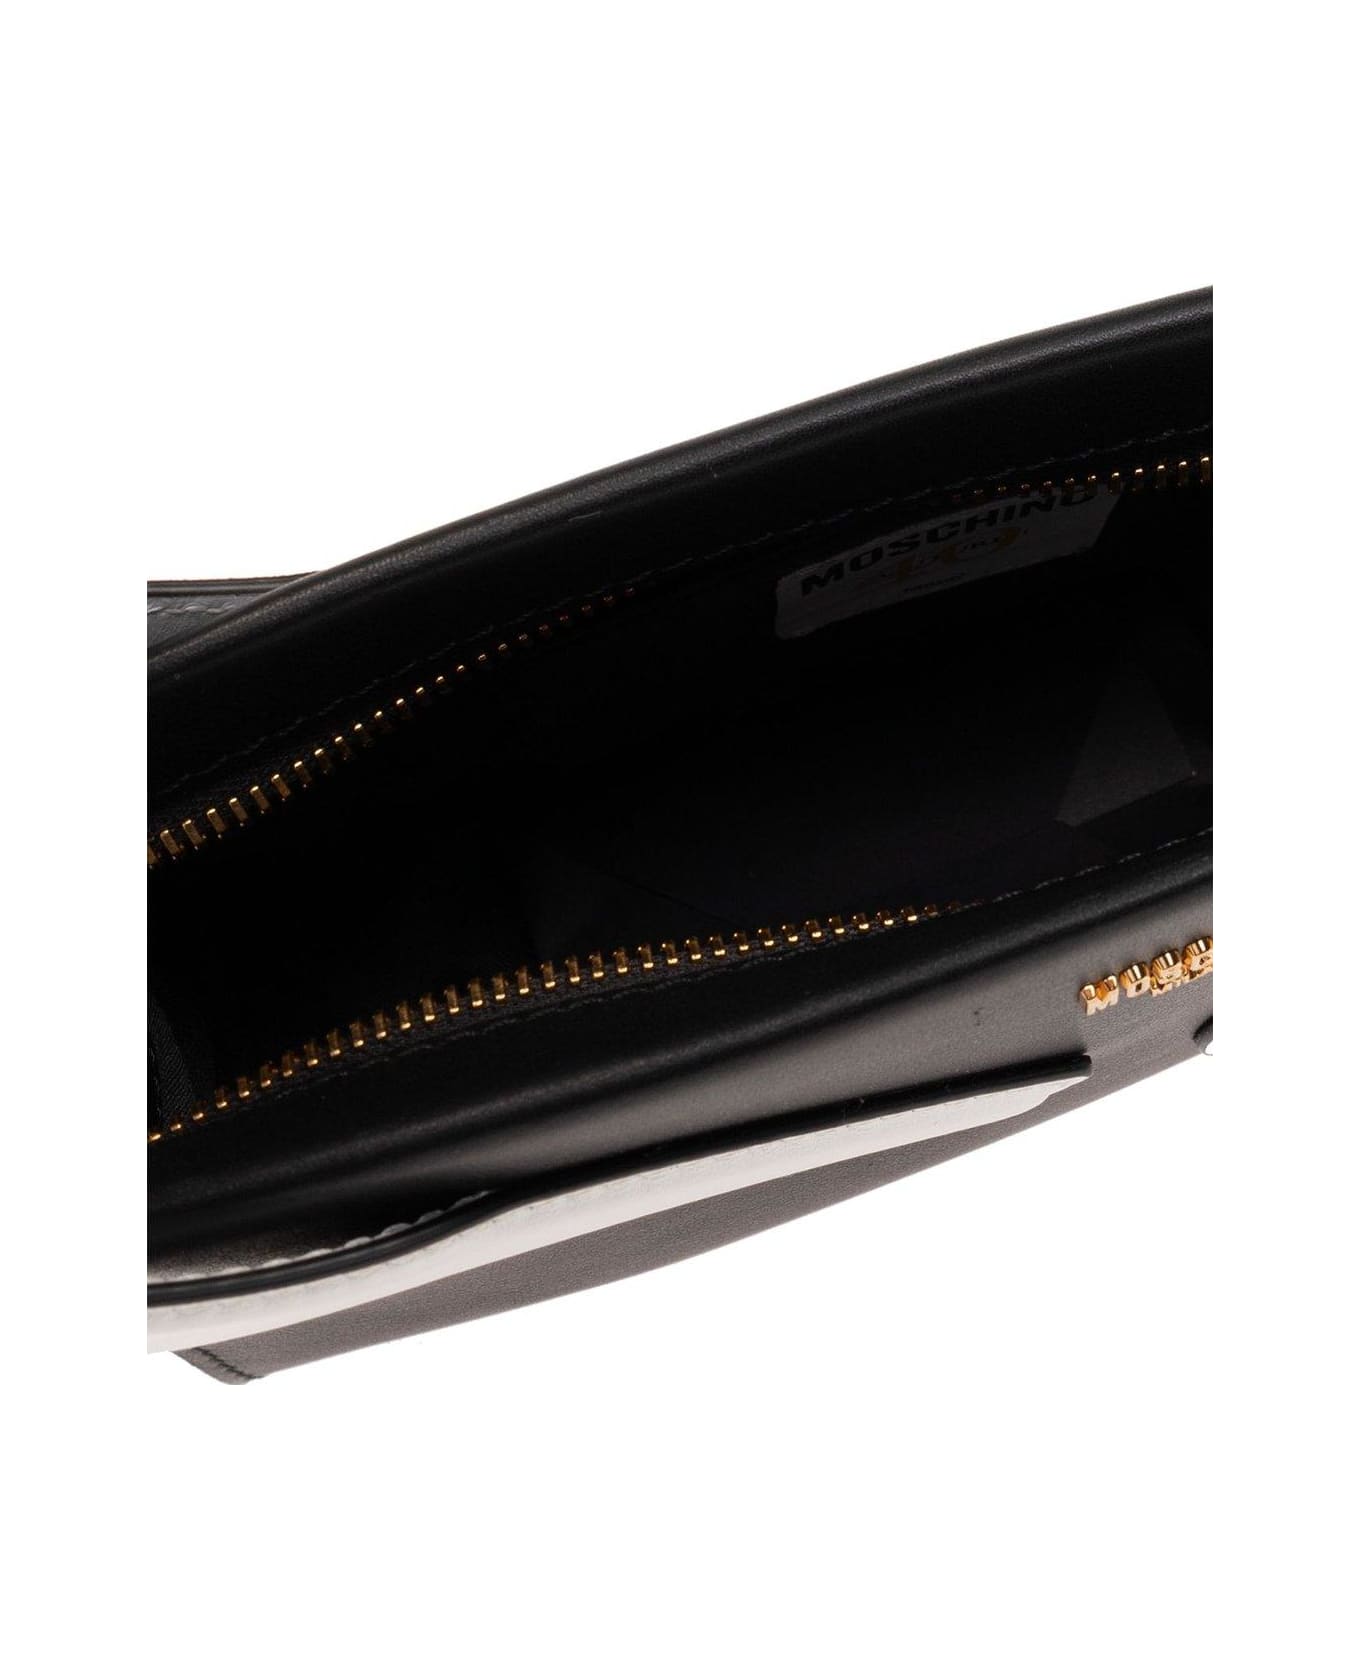 Moschino Exclamation Mark Clutch Bag - Nero